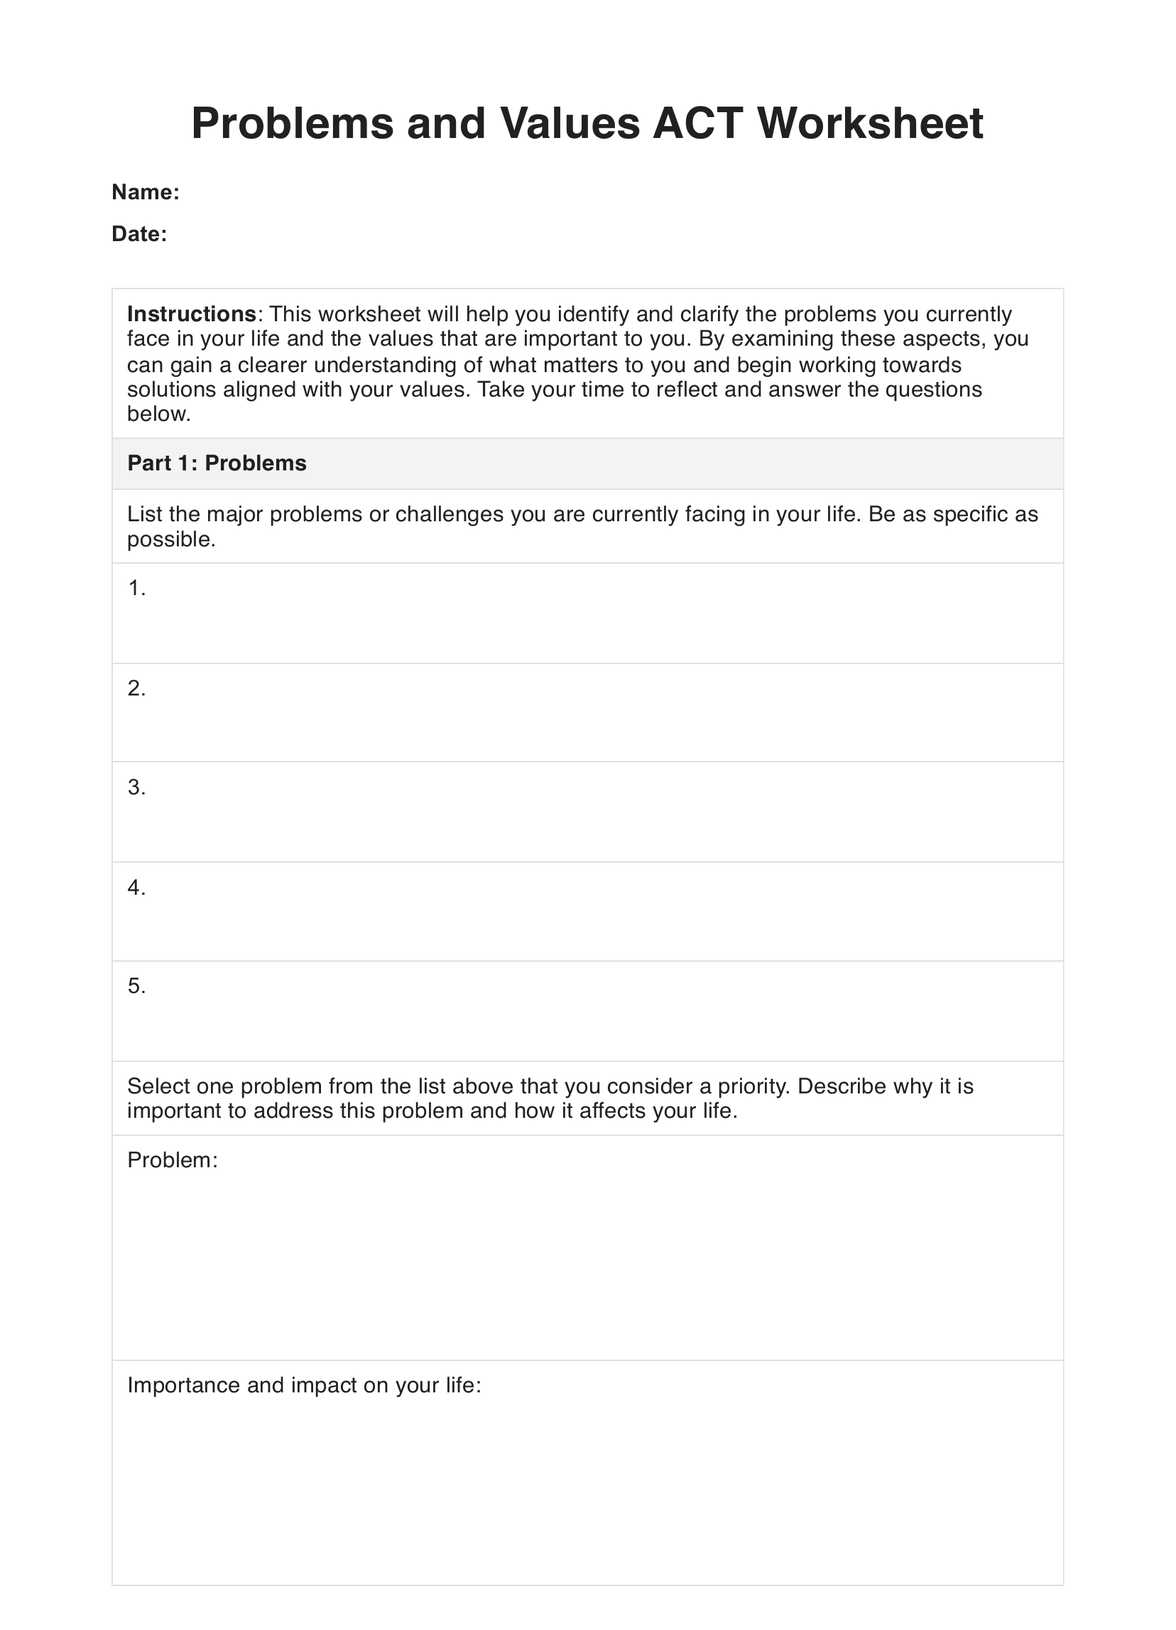 Problems and Values ACT Worksheet PDF Example